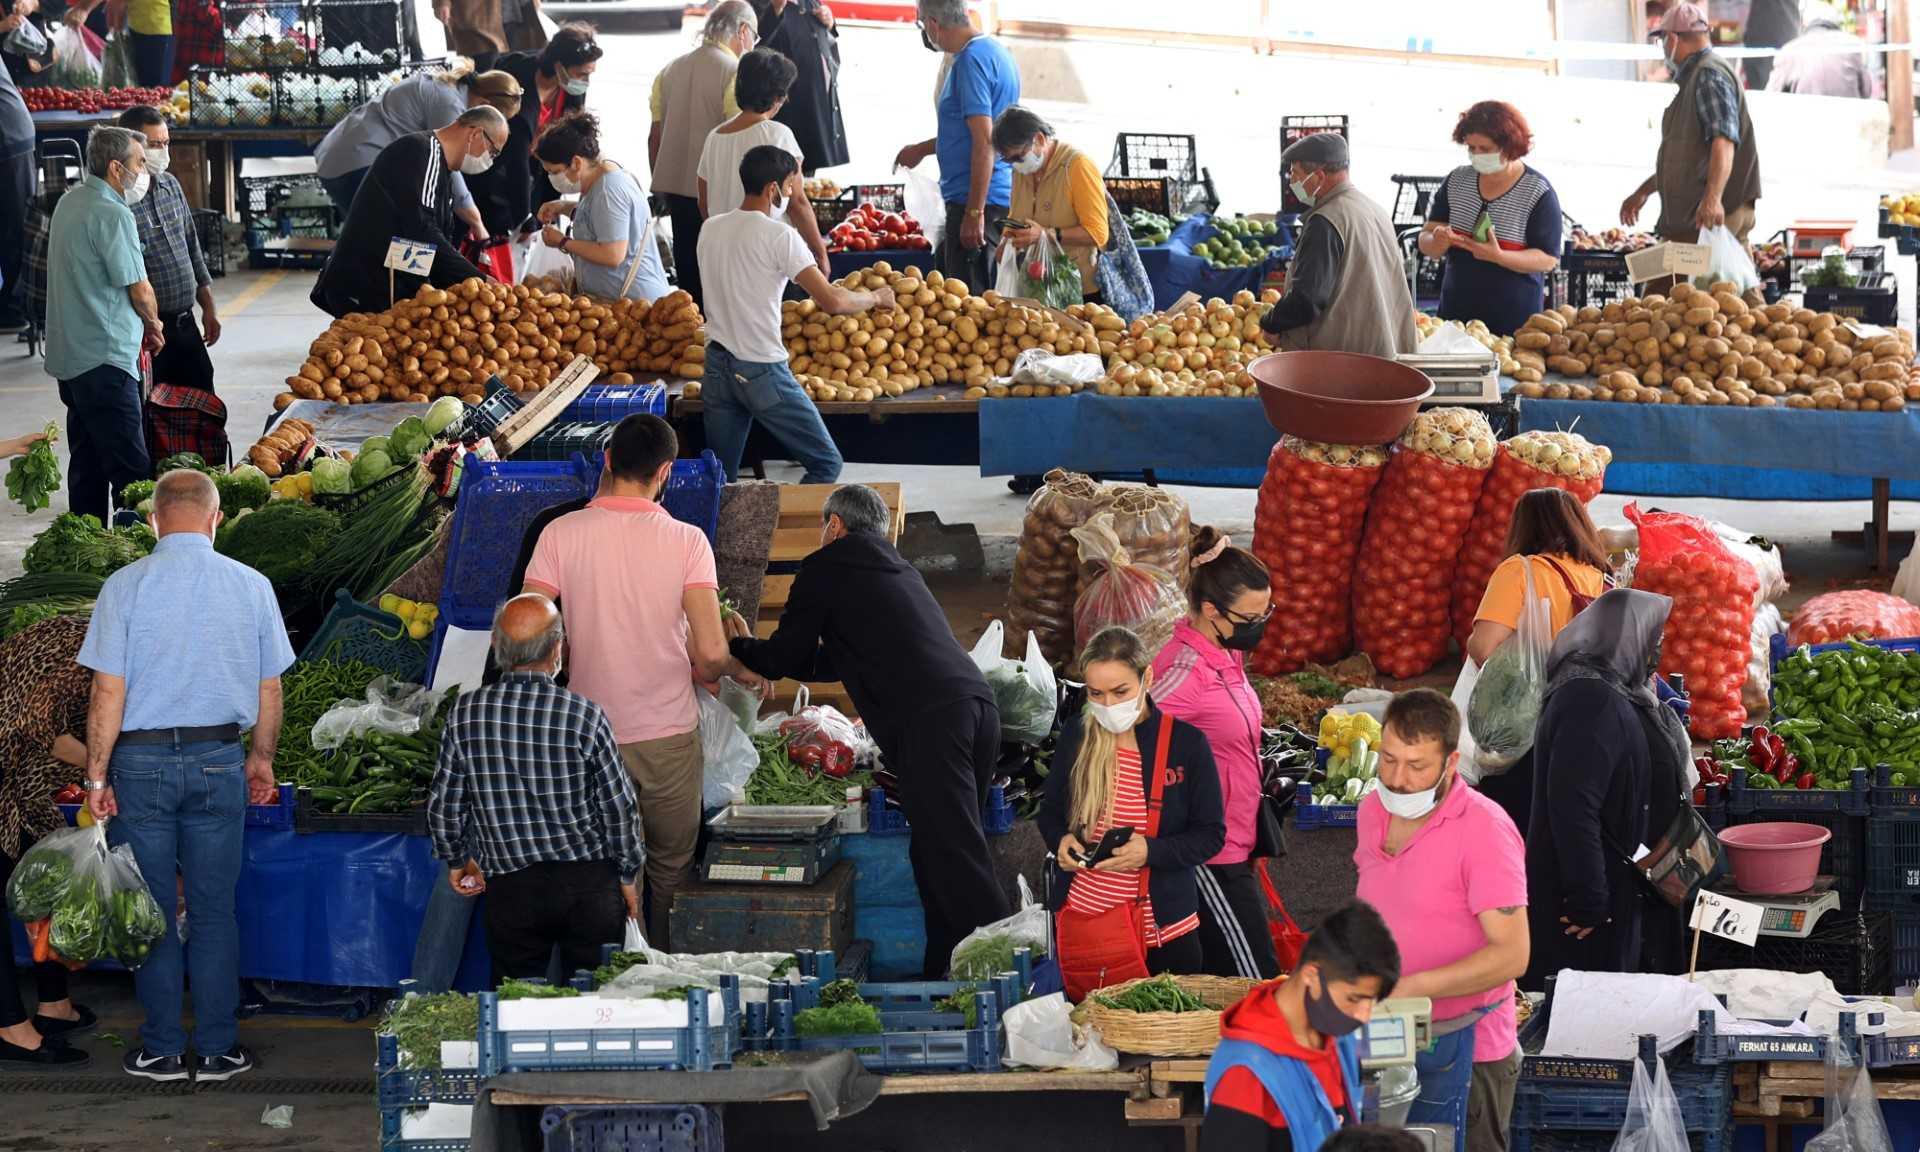 People shop at an open air market after they were re-opened across Turkey amid an economic downturn with double digit inflation, in Ankara on May 8, 2021. Photo: AFP